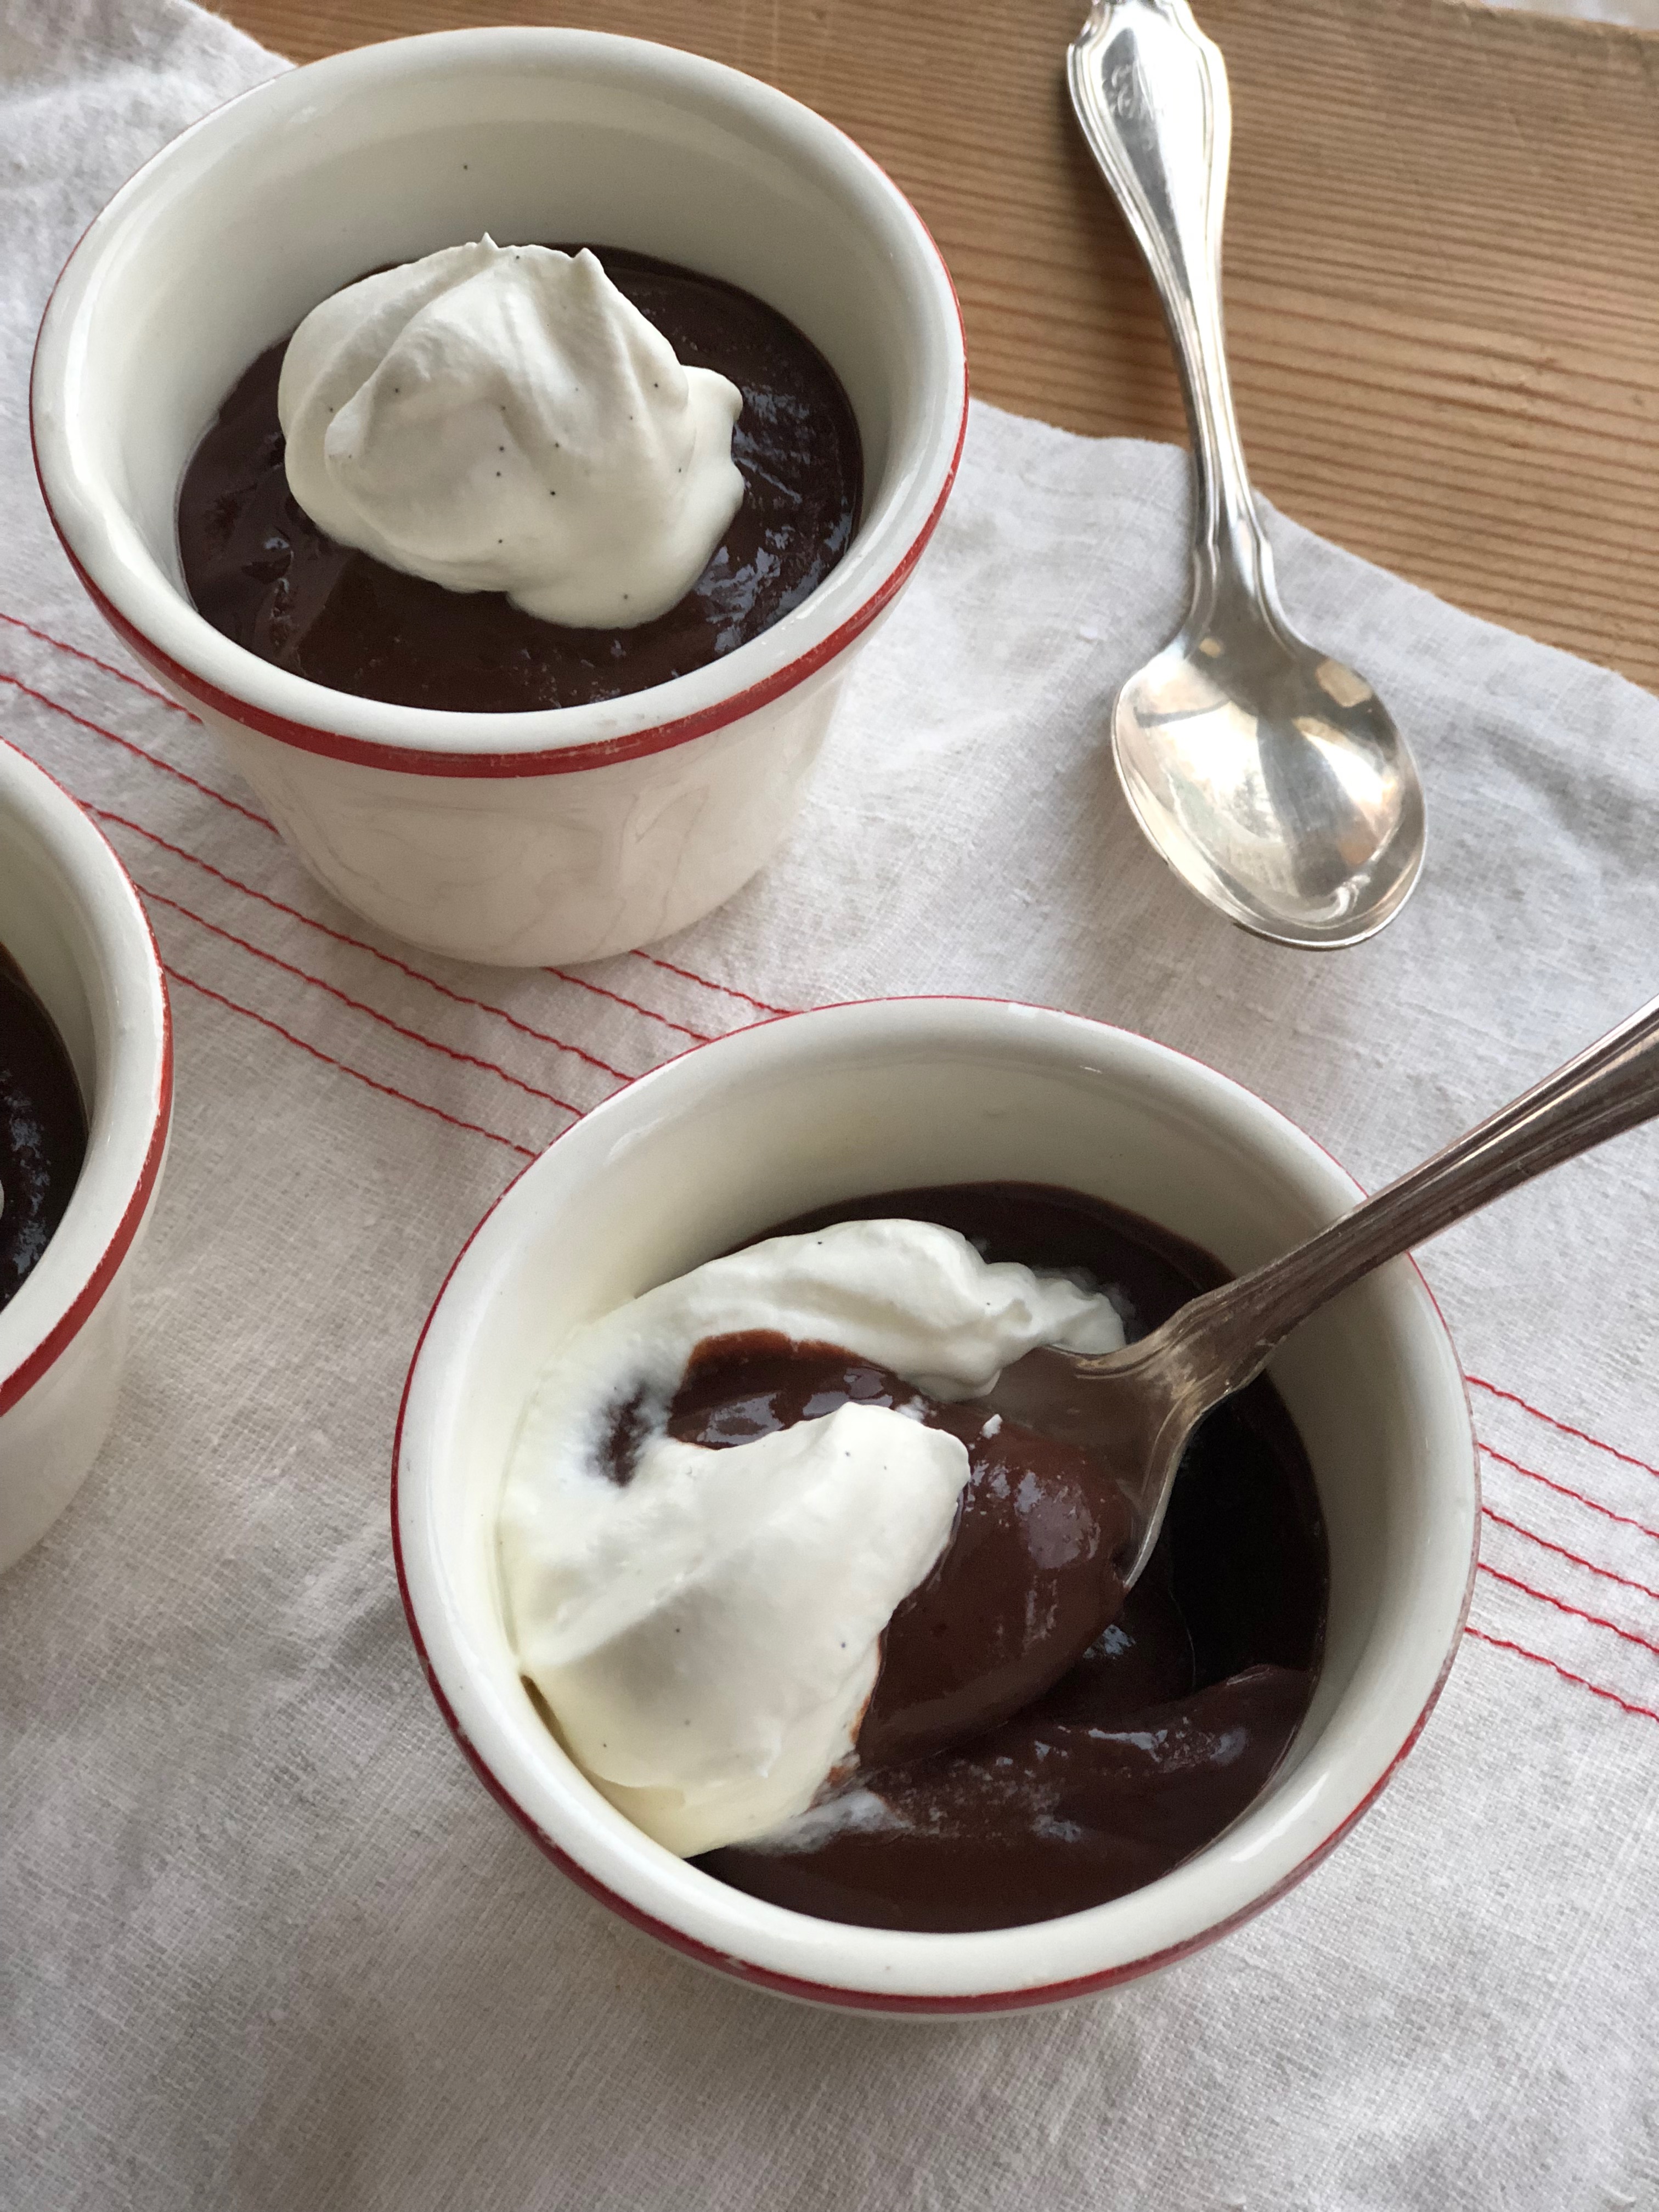 Featured image for “Dark Chocolate Pudding with Sea Salt”